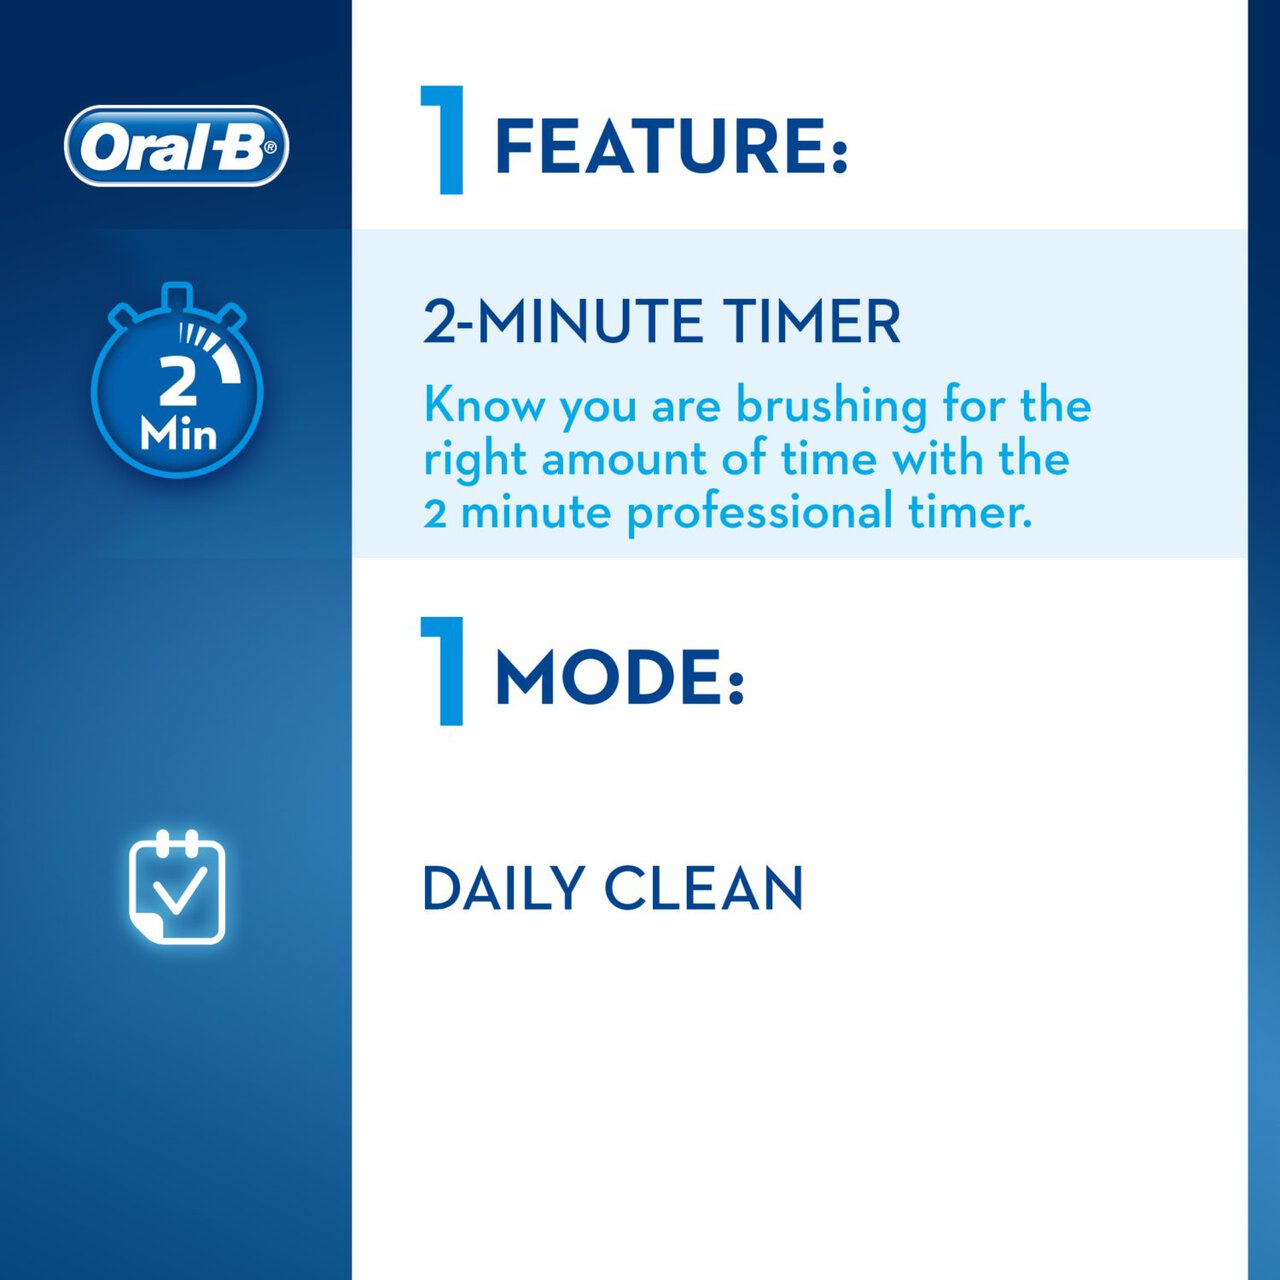 Oral-B Vitality Plus CrossAction Electric Rechargeable Toothbrush